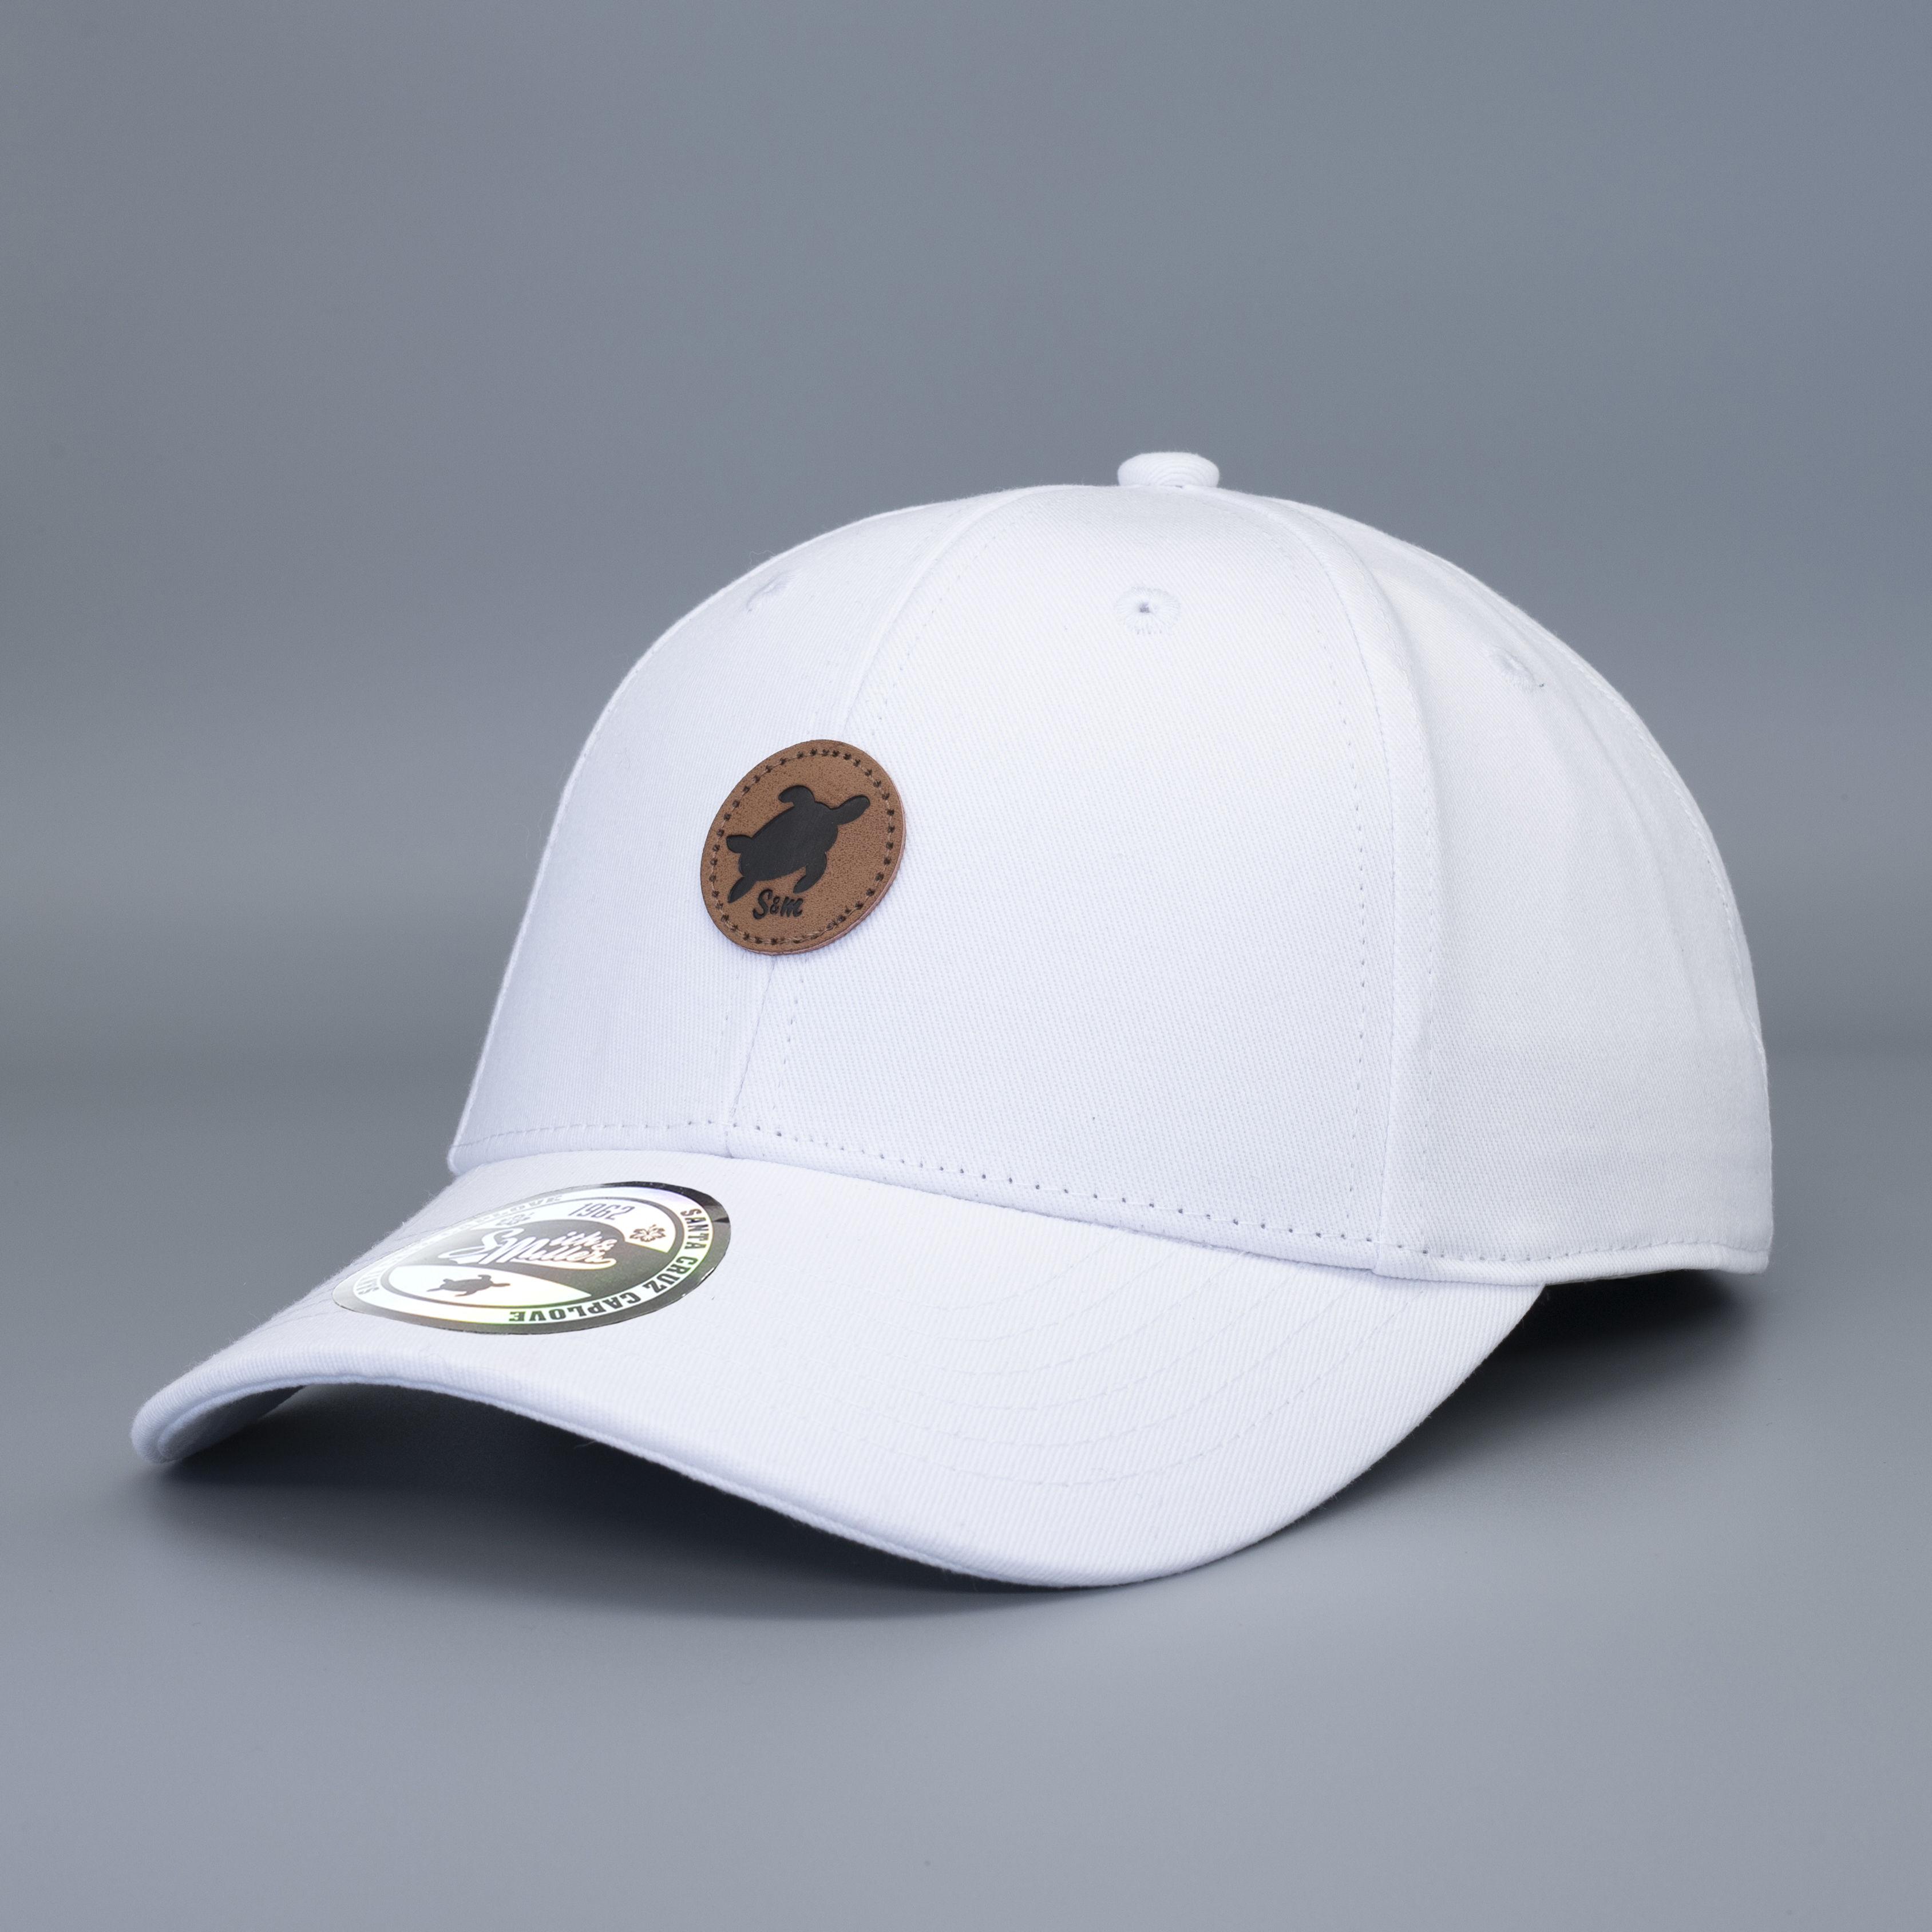 Smith & Miller Bend Unisex Curved Cap, white